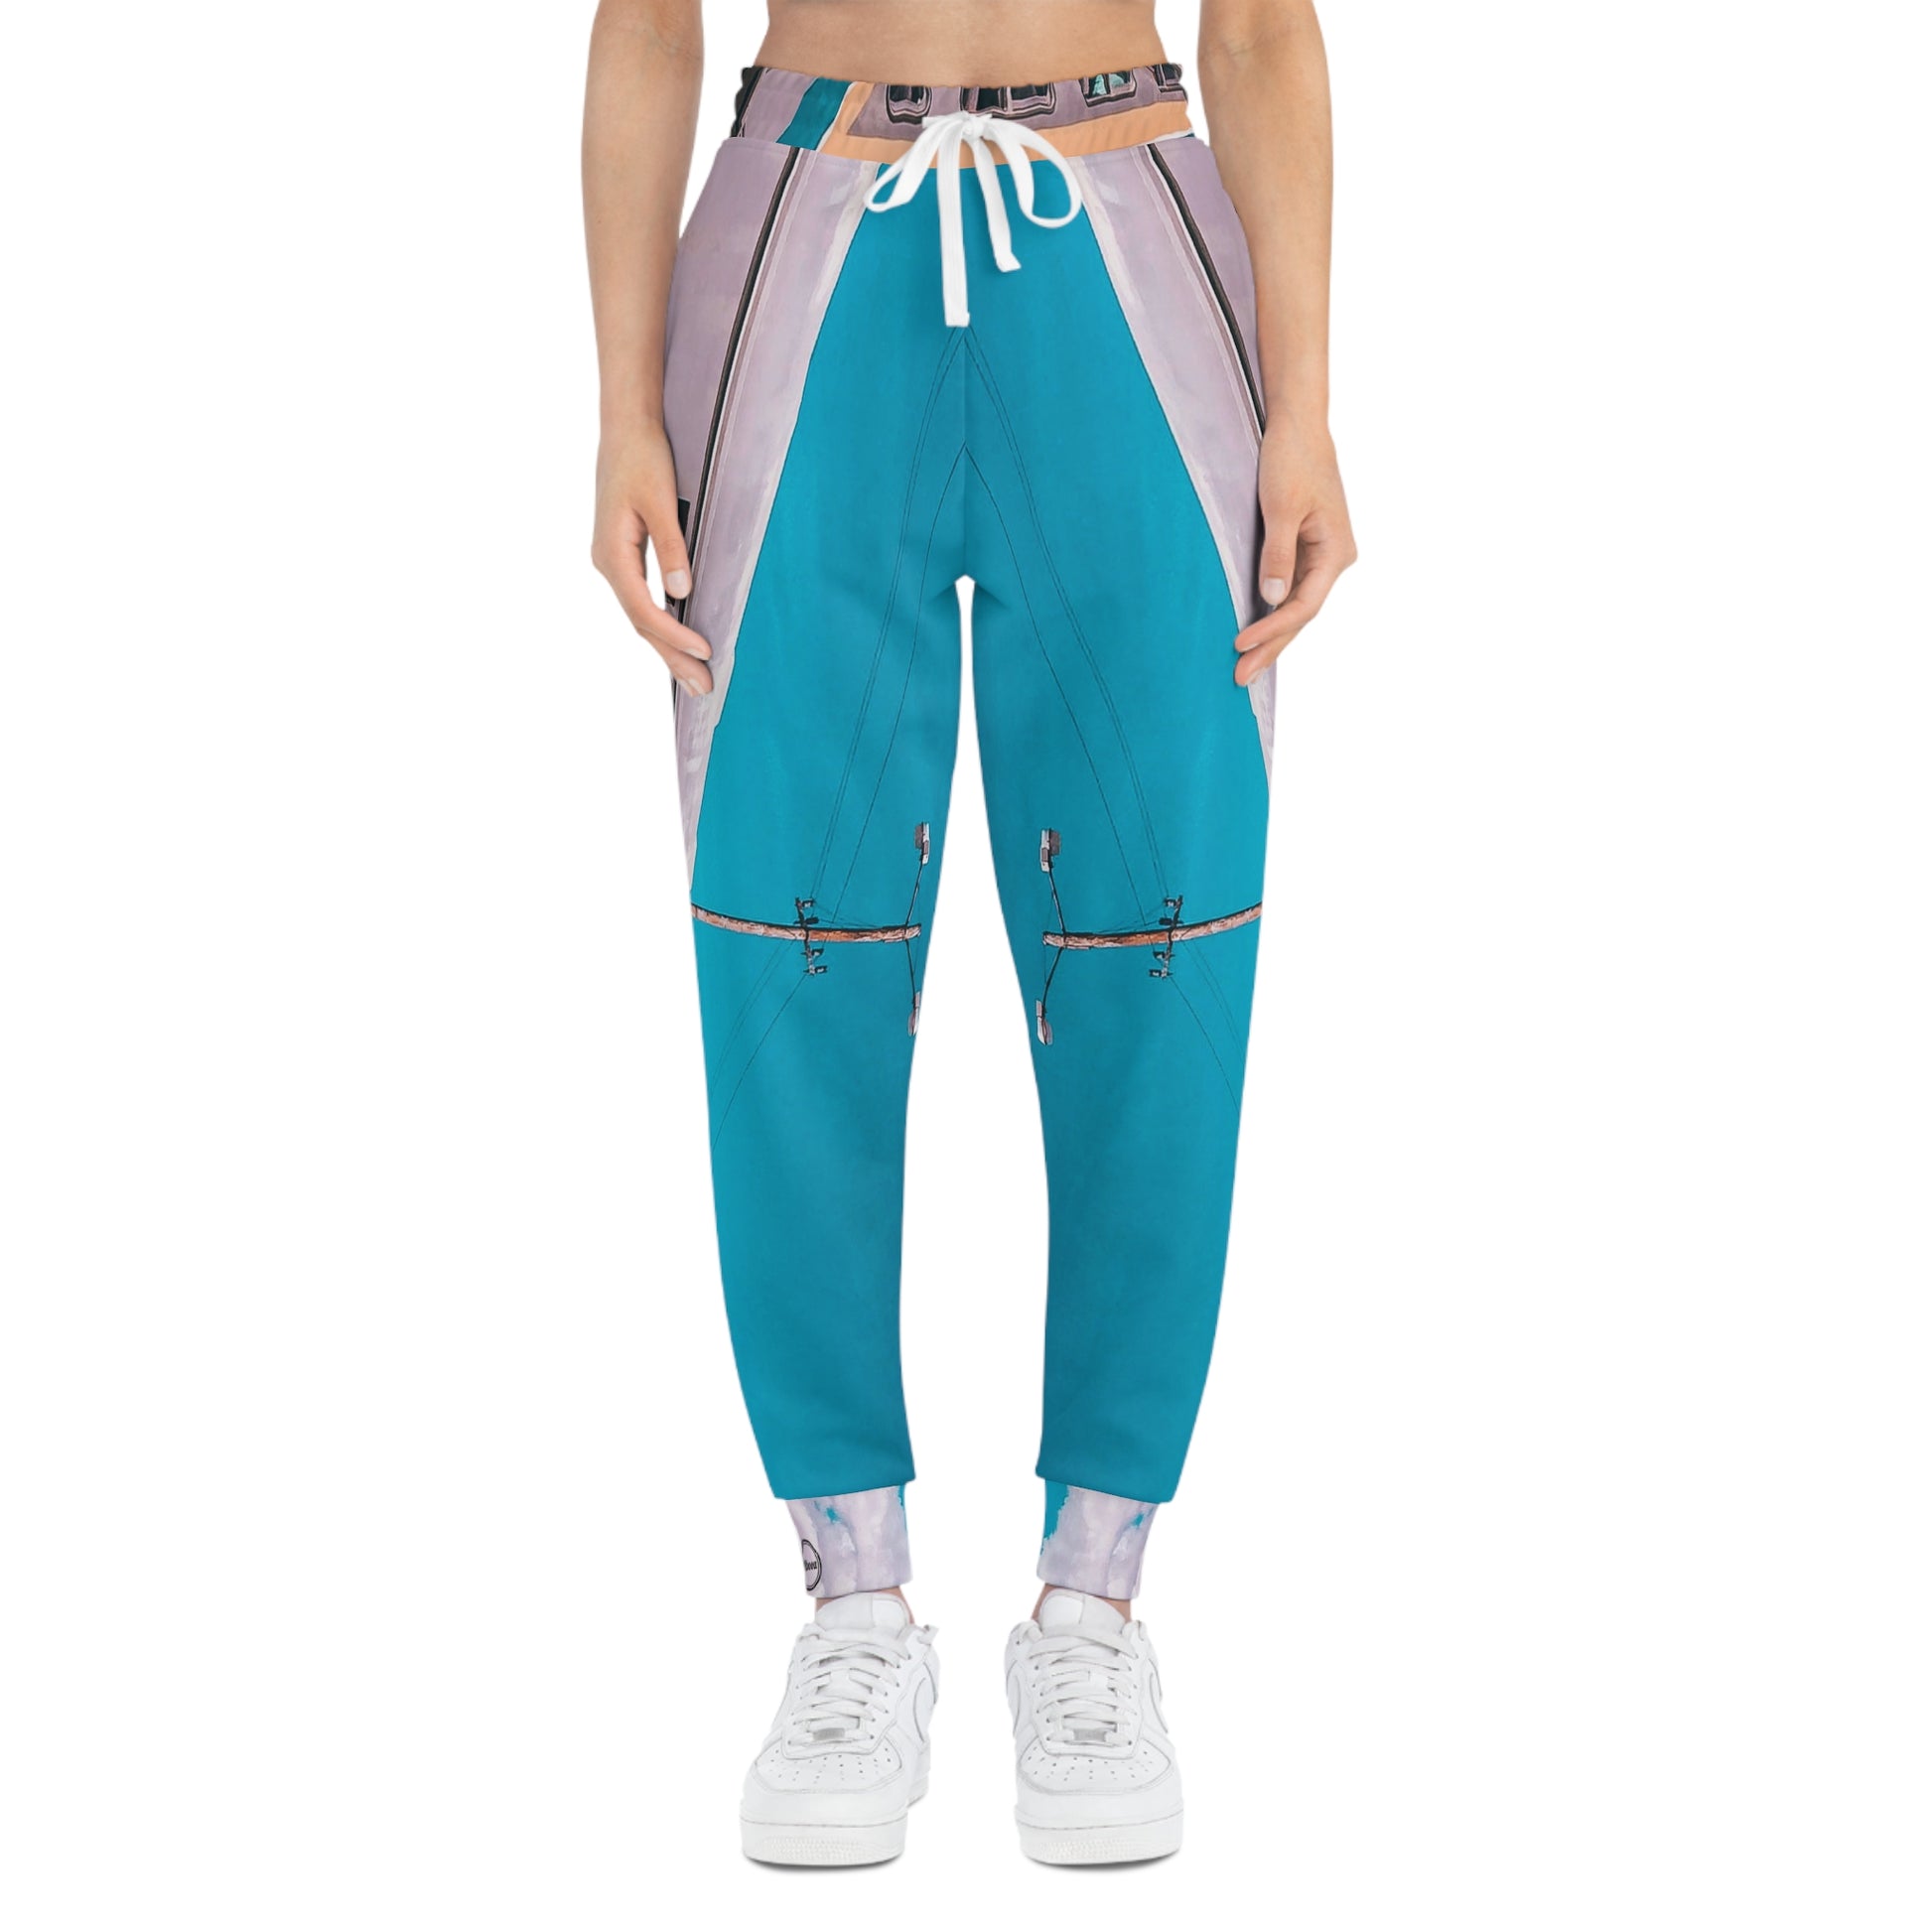 Athletic Joggers For Women | The Train Station